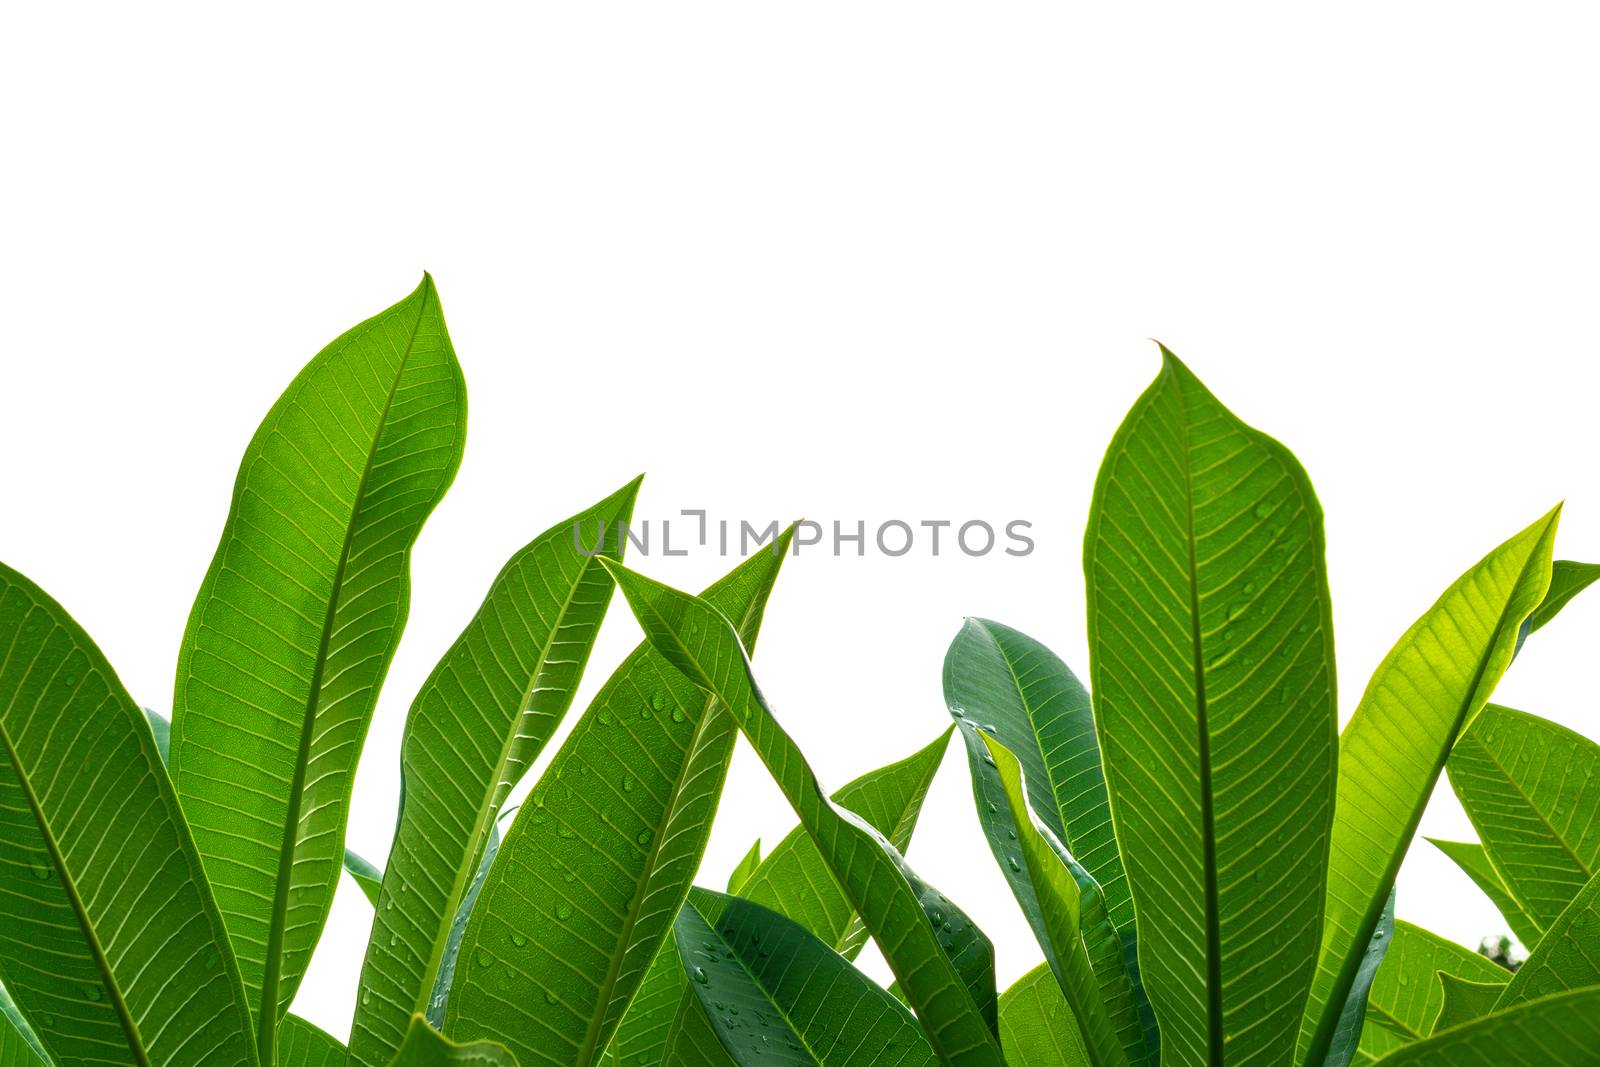 Seedling and plant growing in soil isolated on white background and copy space for insert text